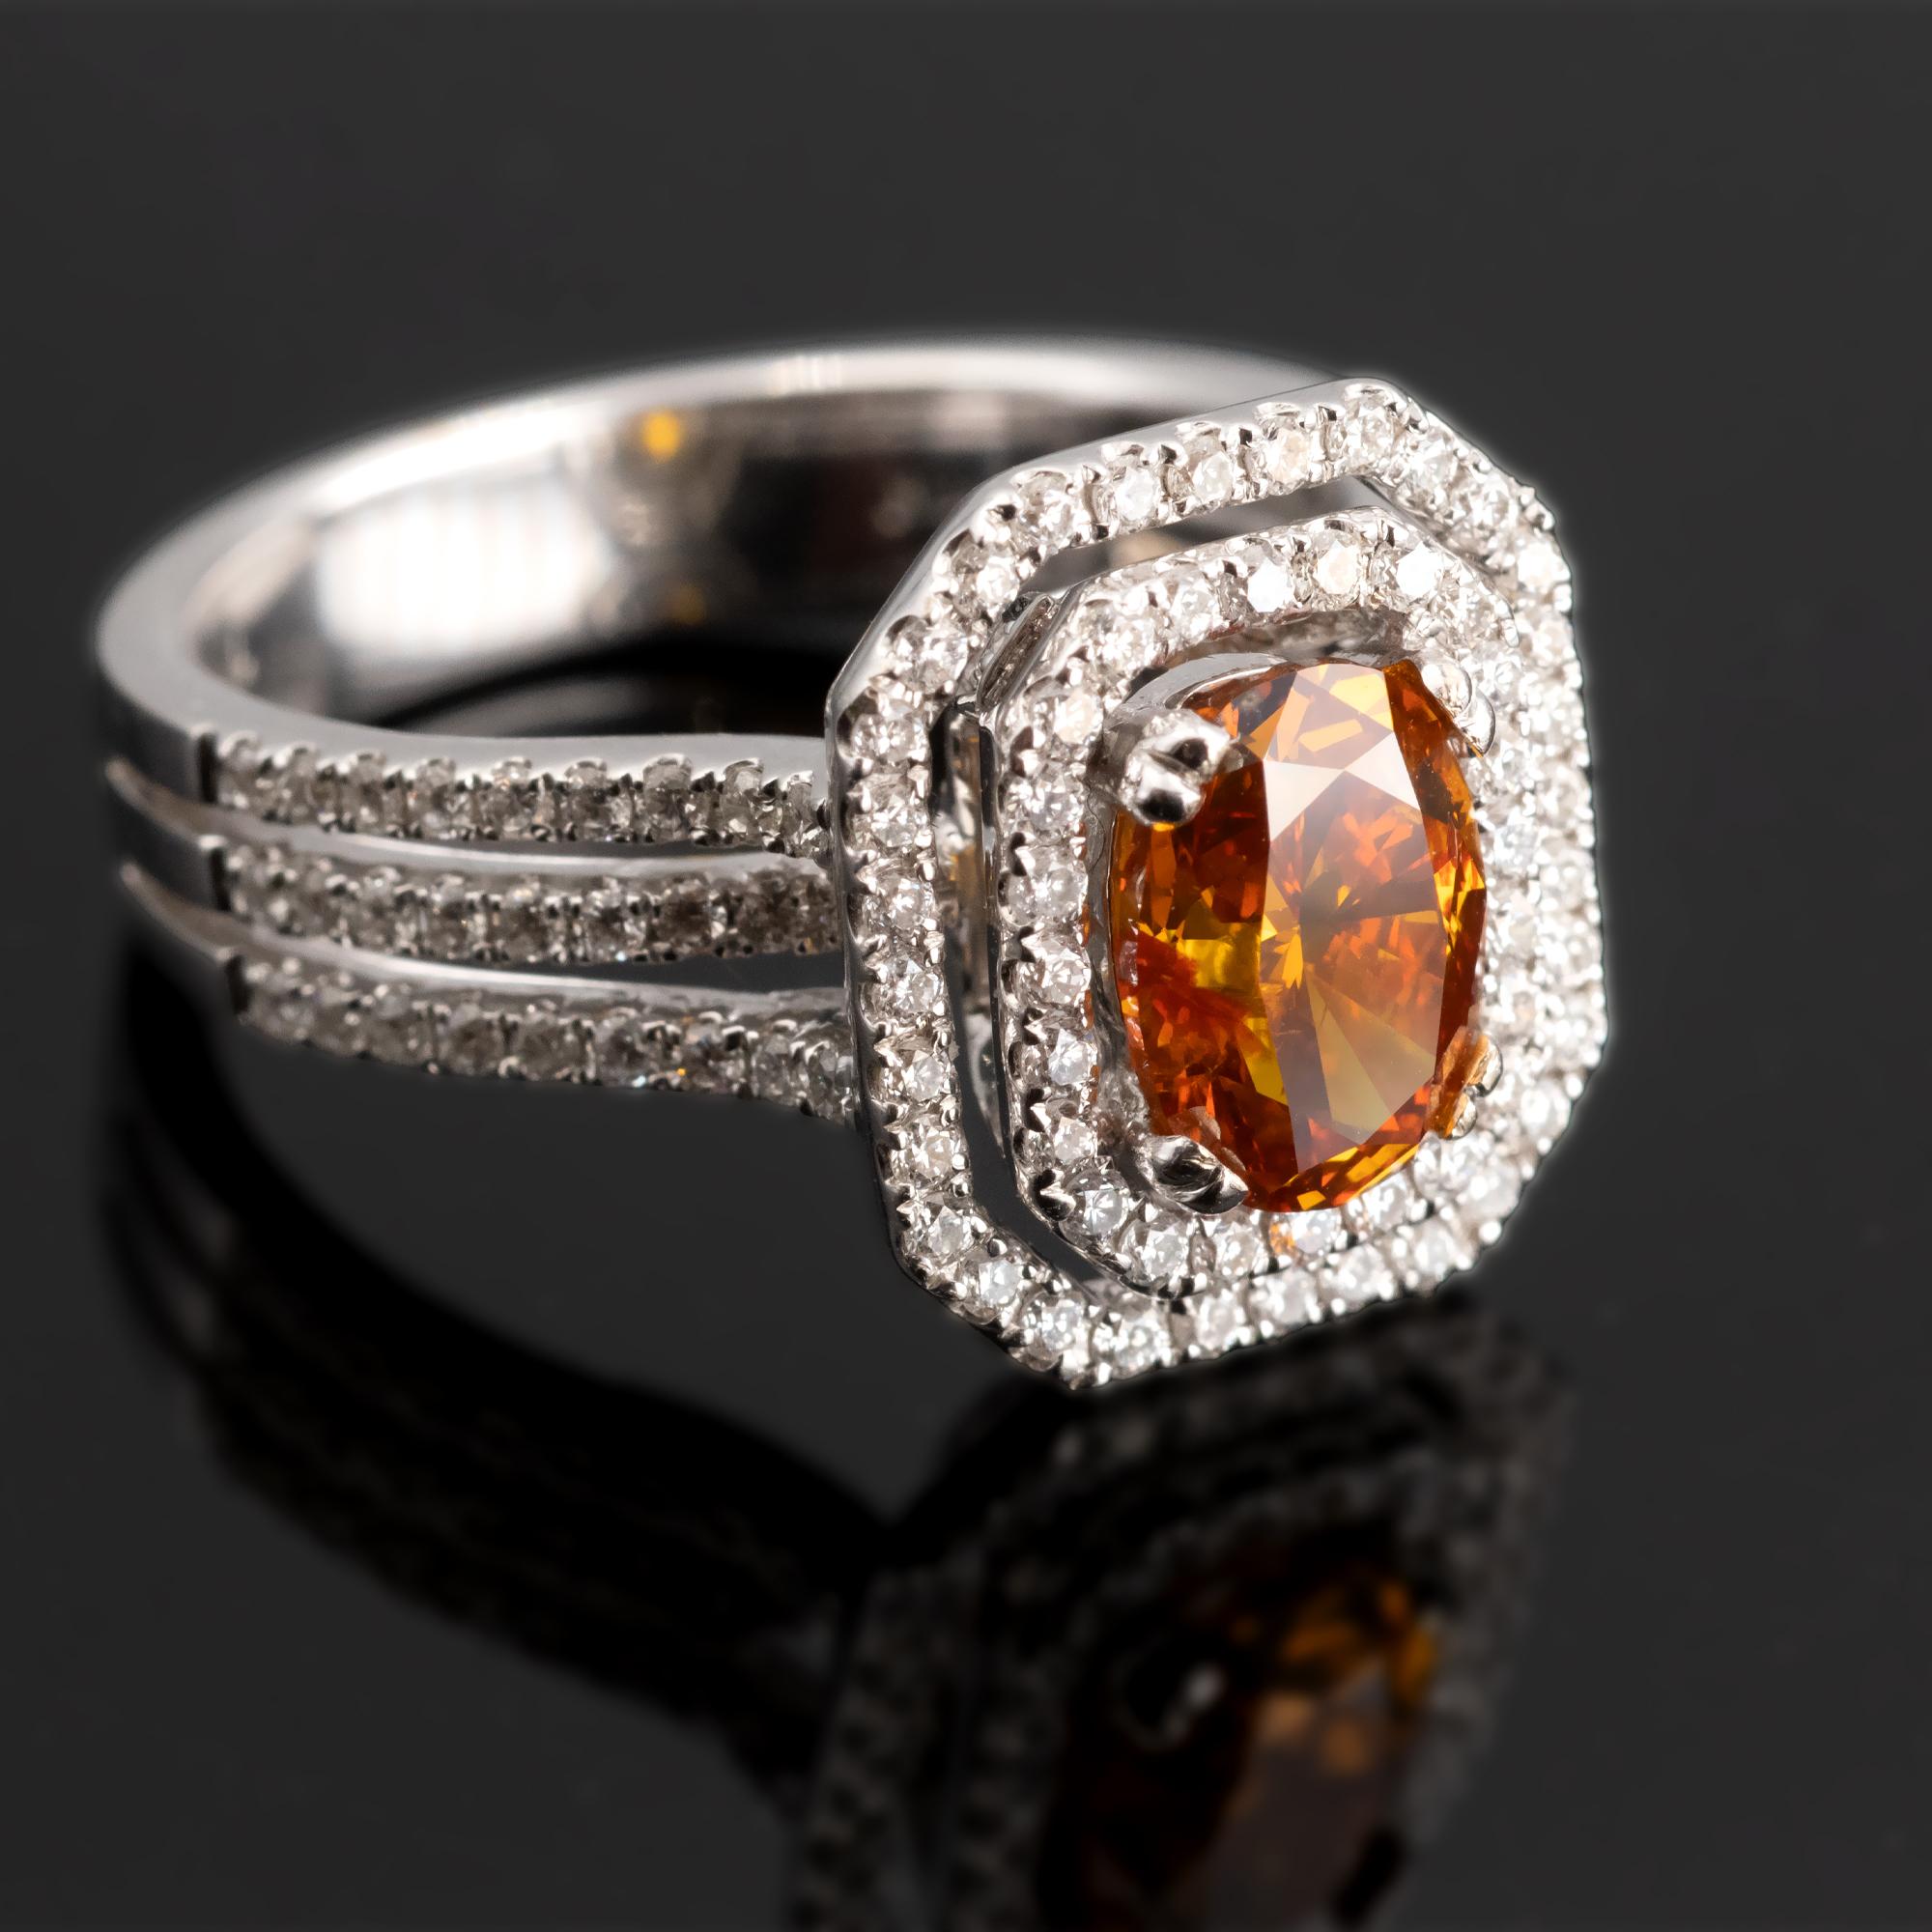 A natural Fancy Vivid yellowish Orange diamond weighing 1.34 carat ( HRD certified) set in a white gold double halo ring alongside 0.70 carats of white diamonds.

Ring Size 6½ (US) - 53 (EU)
